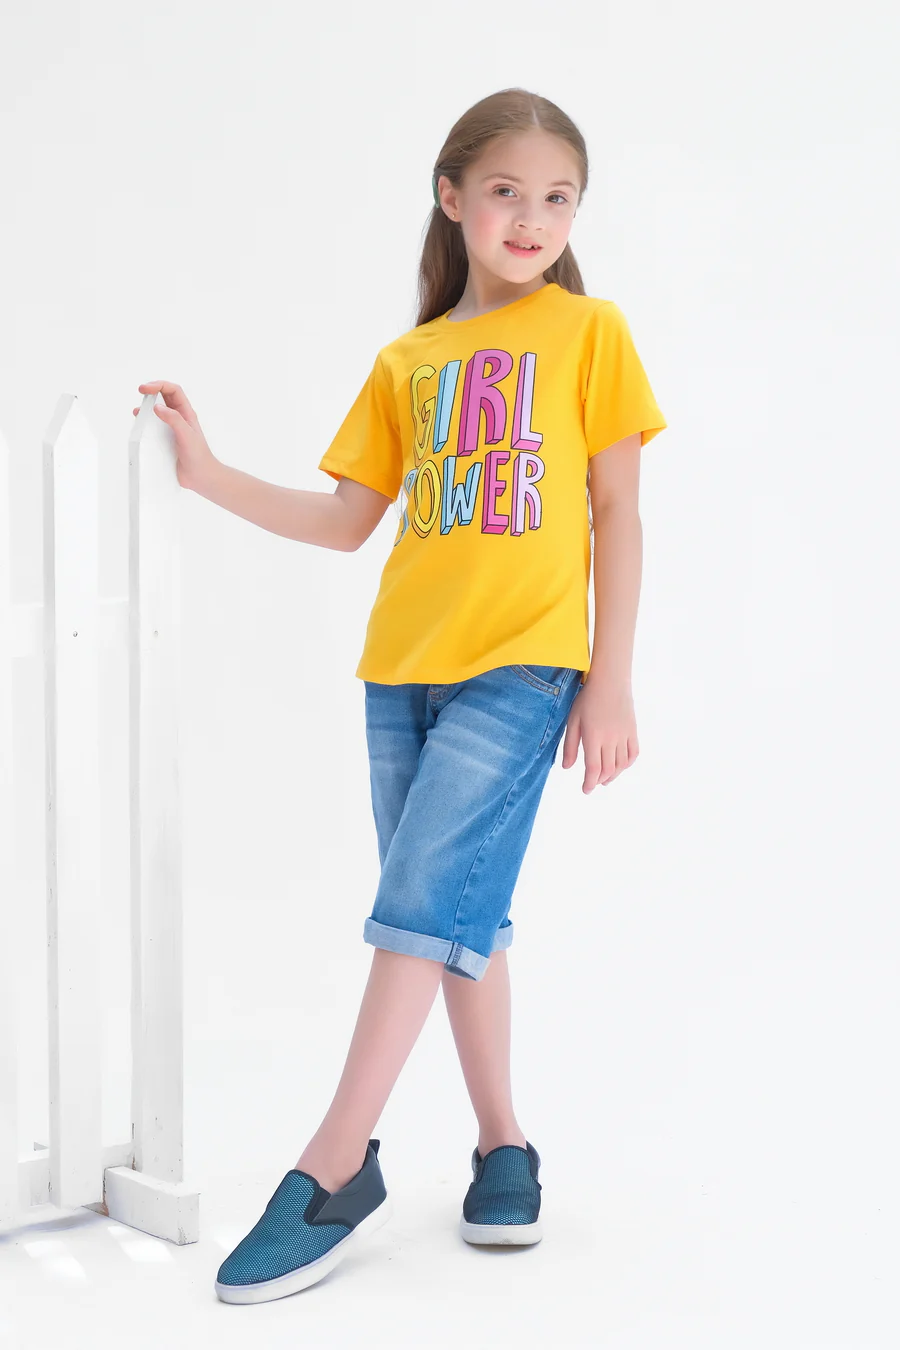 Girl Power - Half Sleeves T-Shirts For Kids - Yellow